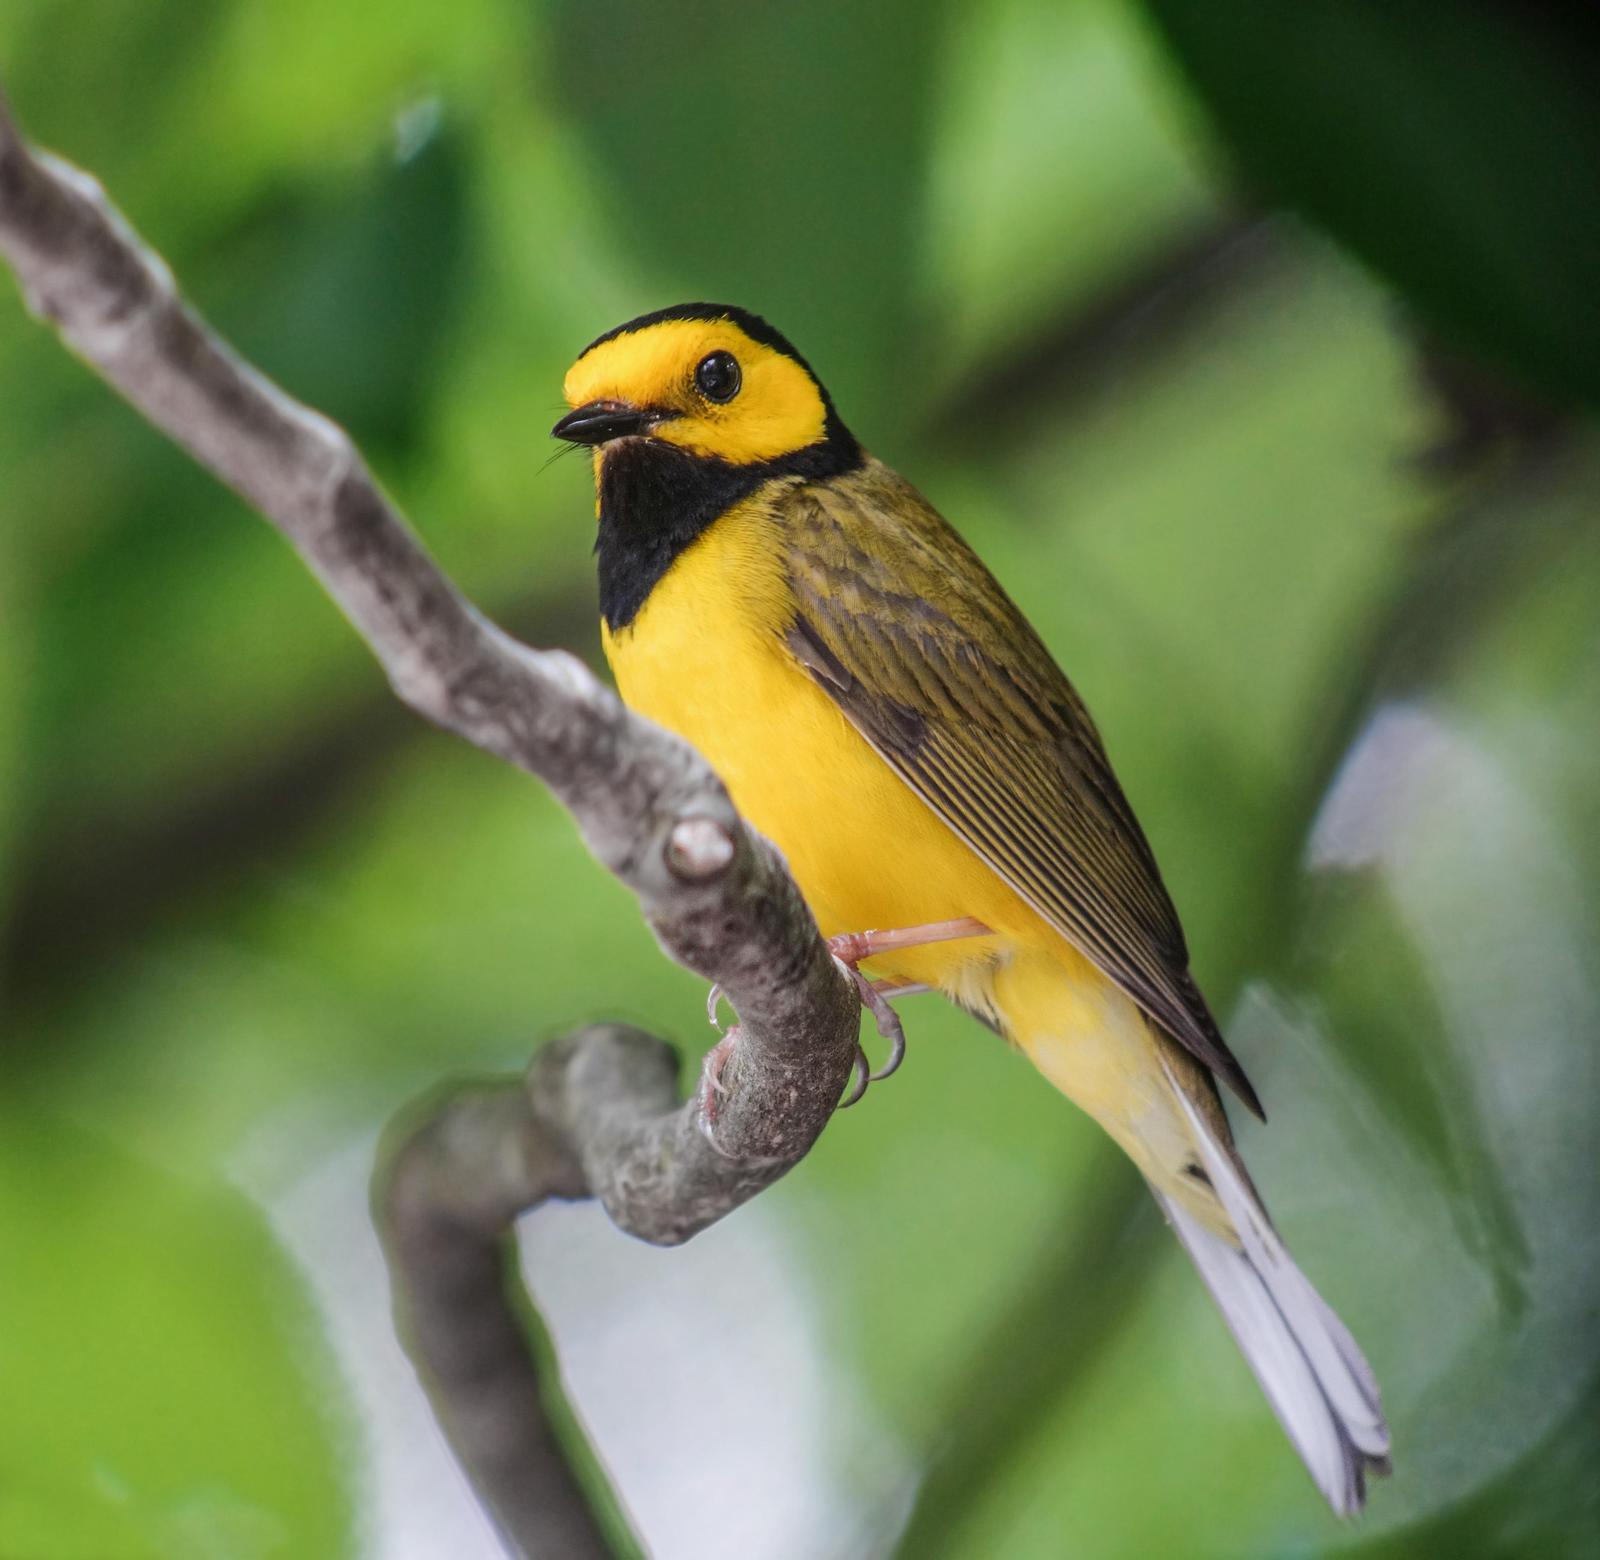 Hooded Warbler Photo by Joseph Pescatore